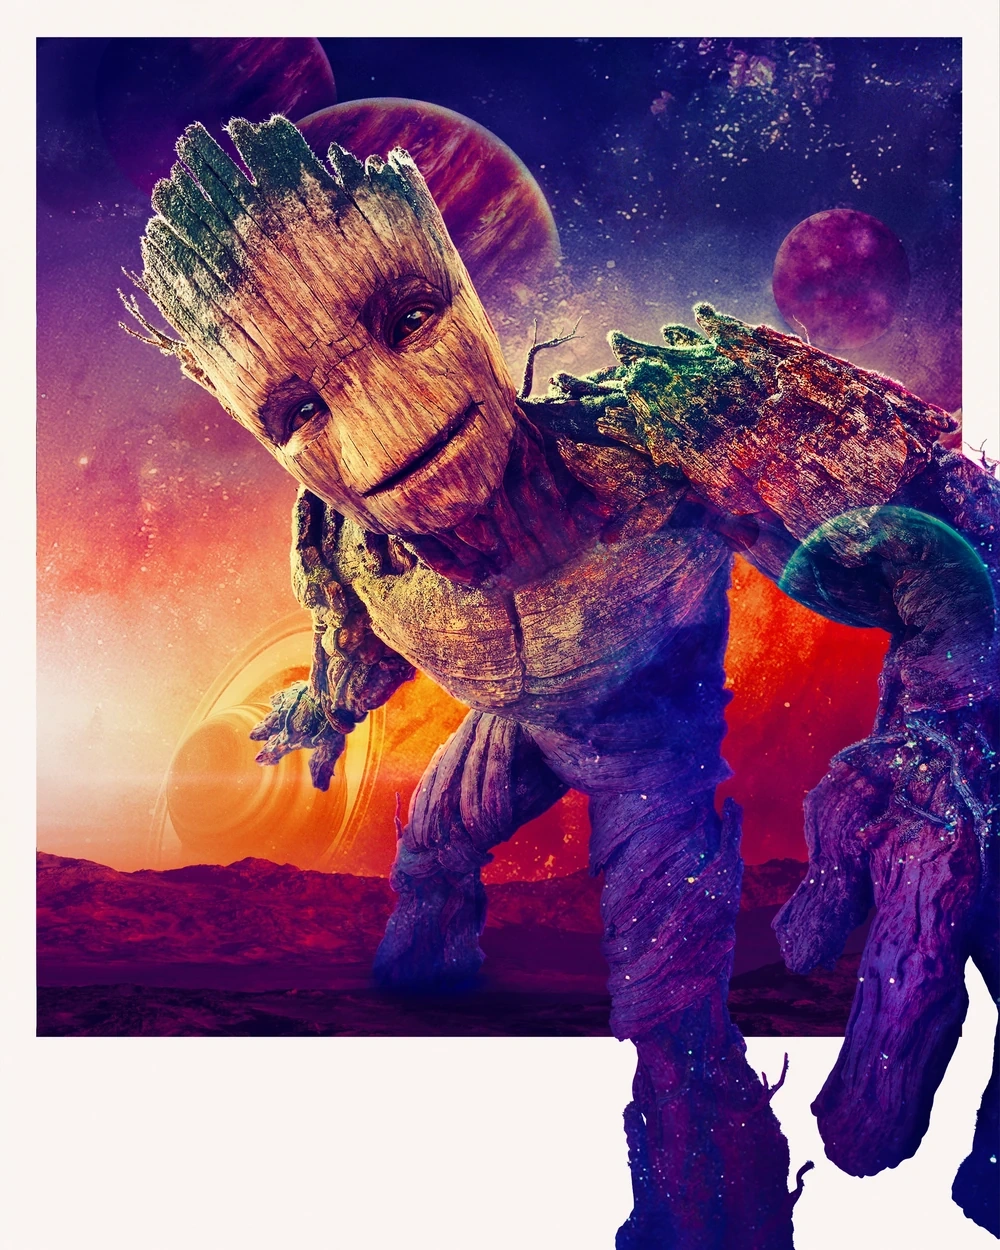 sinful-otter787: Groot from guardians of the galaxy with extra